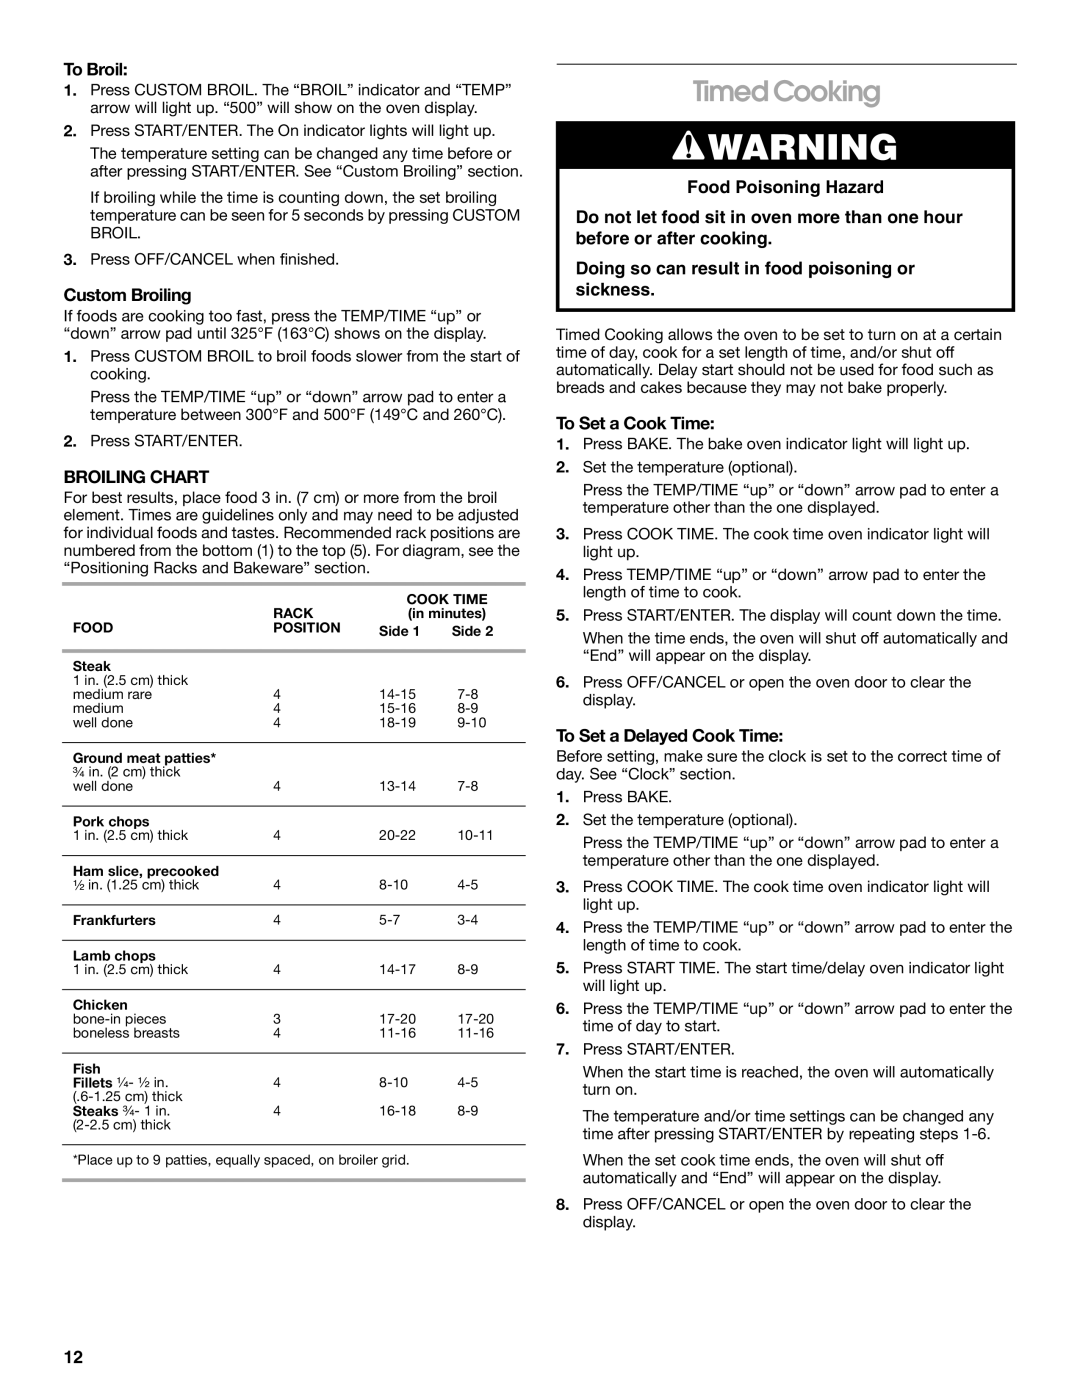 Whirlpool SES380MS0 Timed Cooking, To Broil, Custom Broiling, Broiling Chart, Food Poisoning Hazard, To Set a Cook Time 